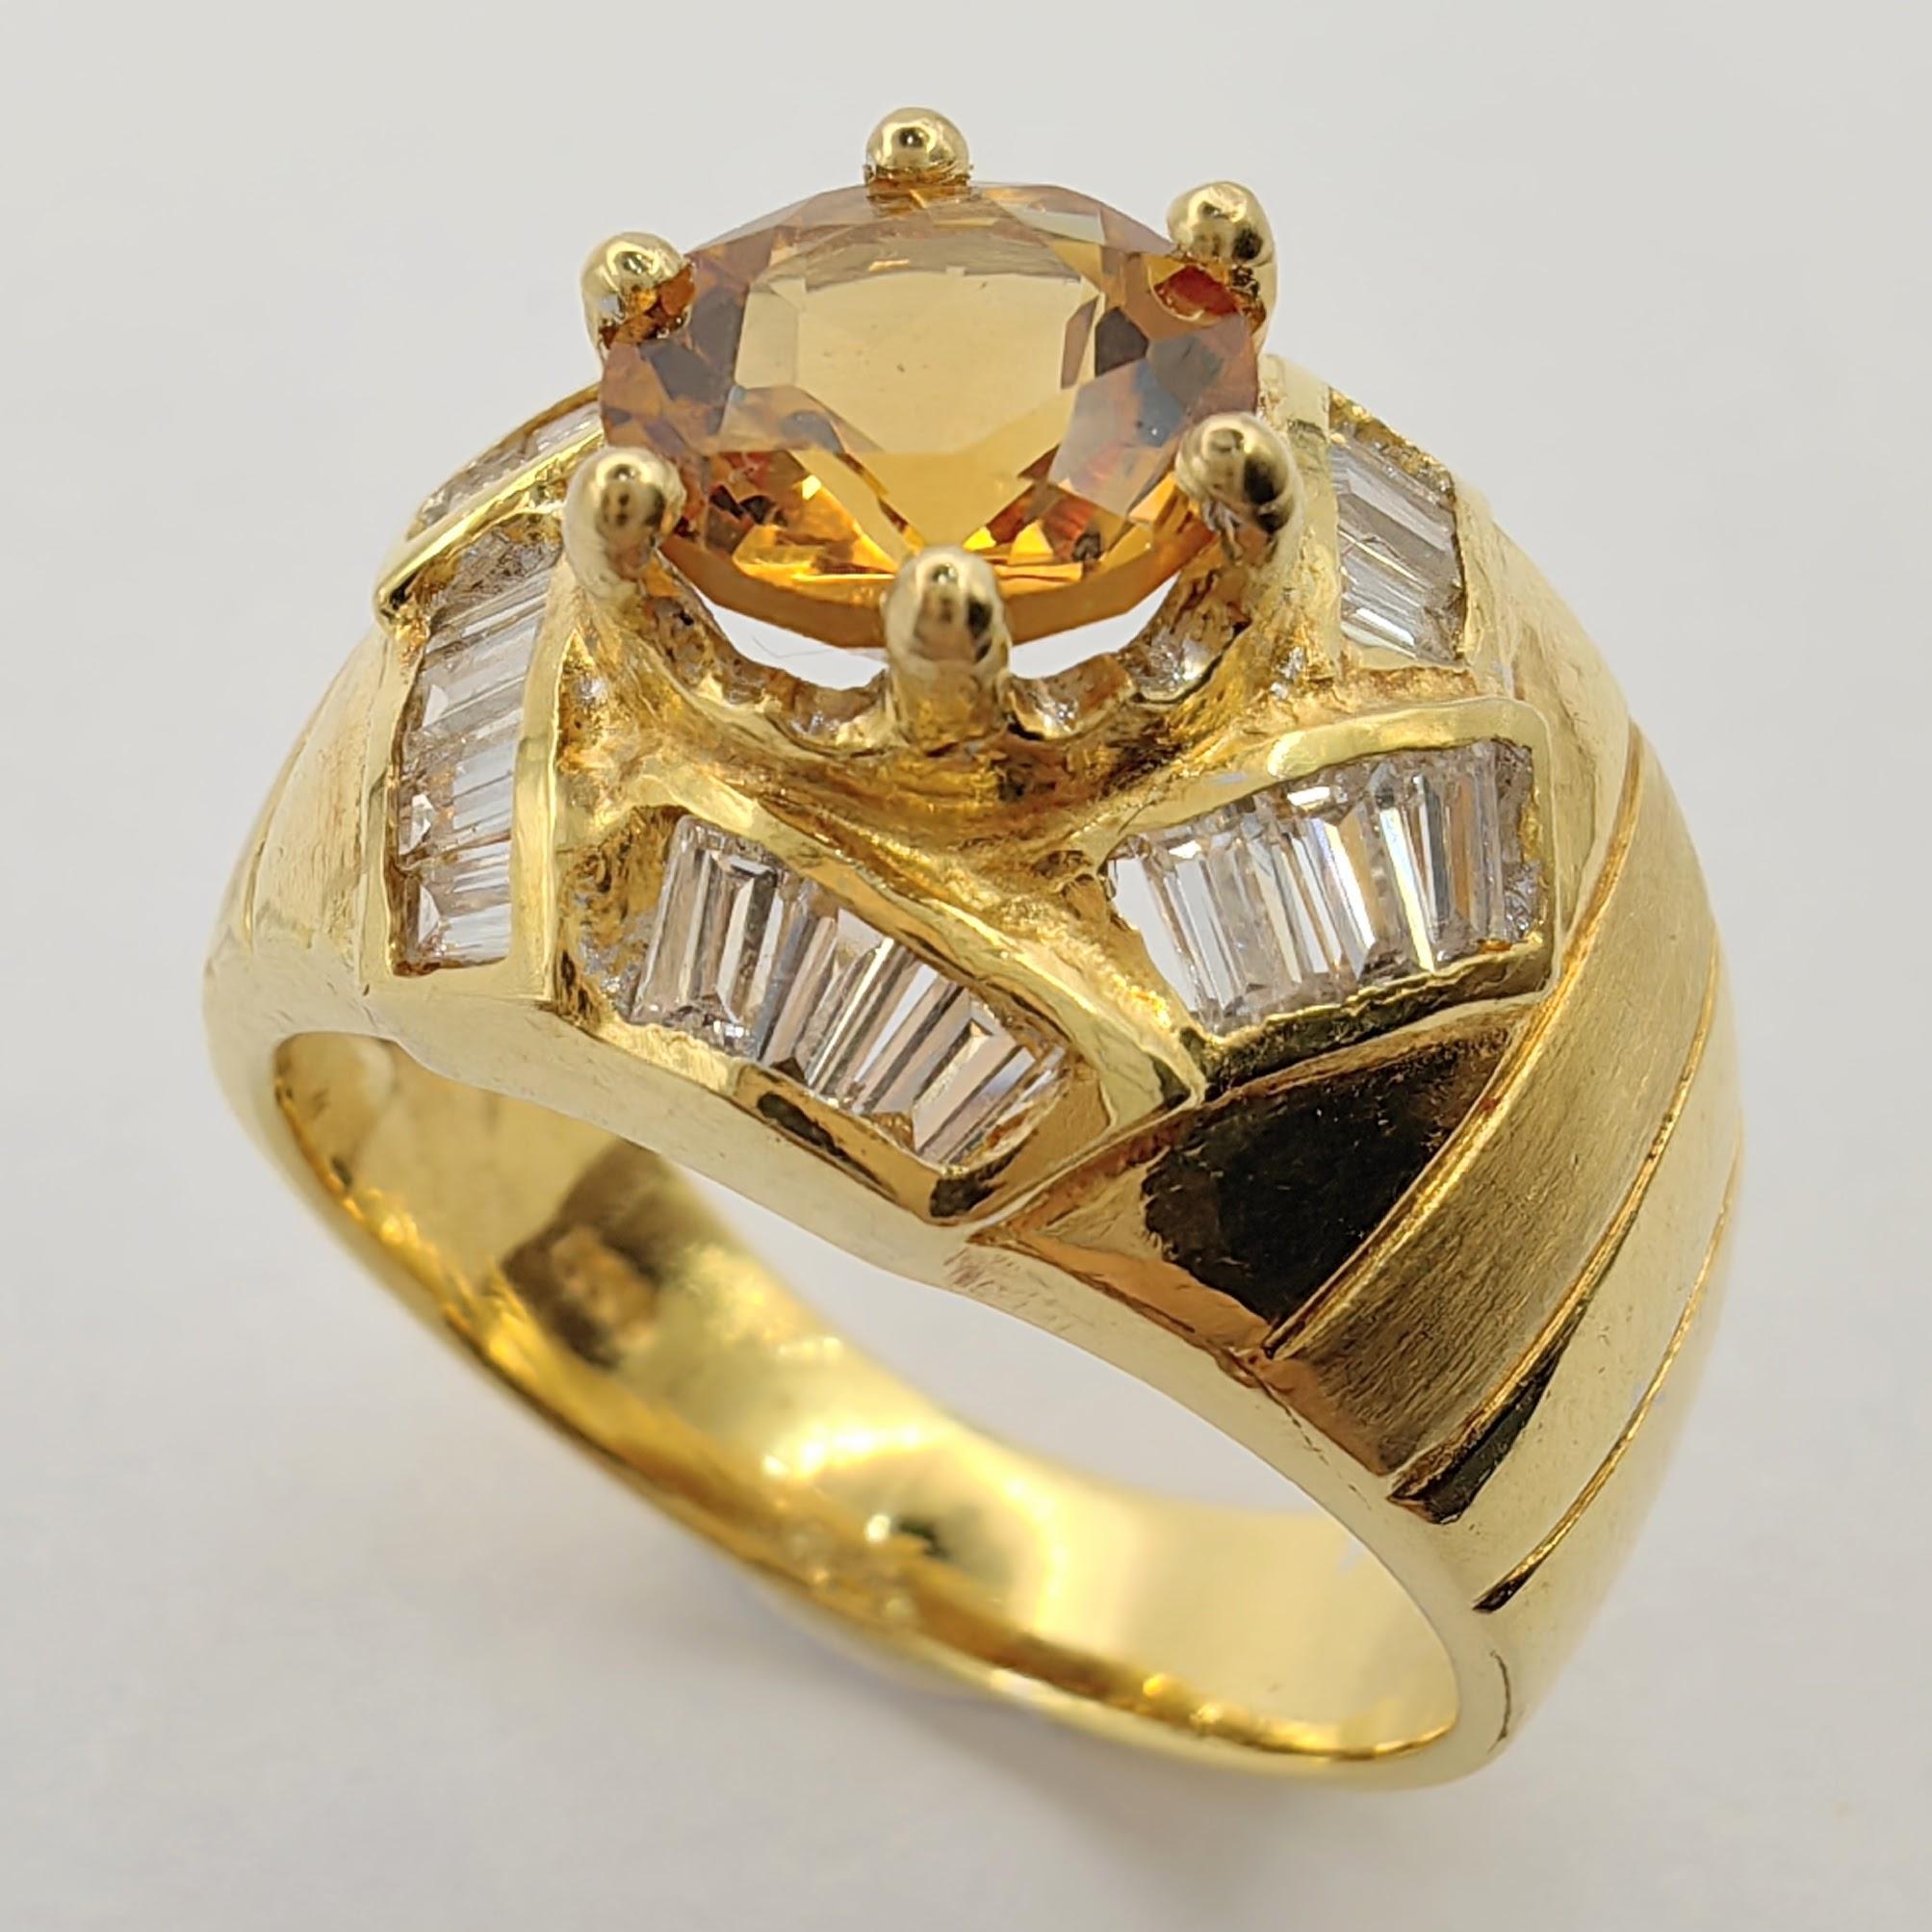 Introducing our Vintage Art Deco Hexagon 1.22ct Citrine Diamond Men's Ring in 20K Yellow Gold, a timeless piece that effortlessly blends vintage allure with modern elegance.

At the heart of this distinctive ring lies a stunning round-cut citrine,